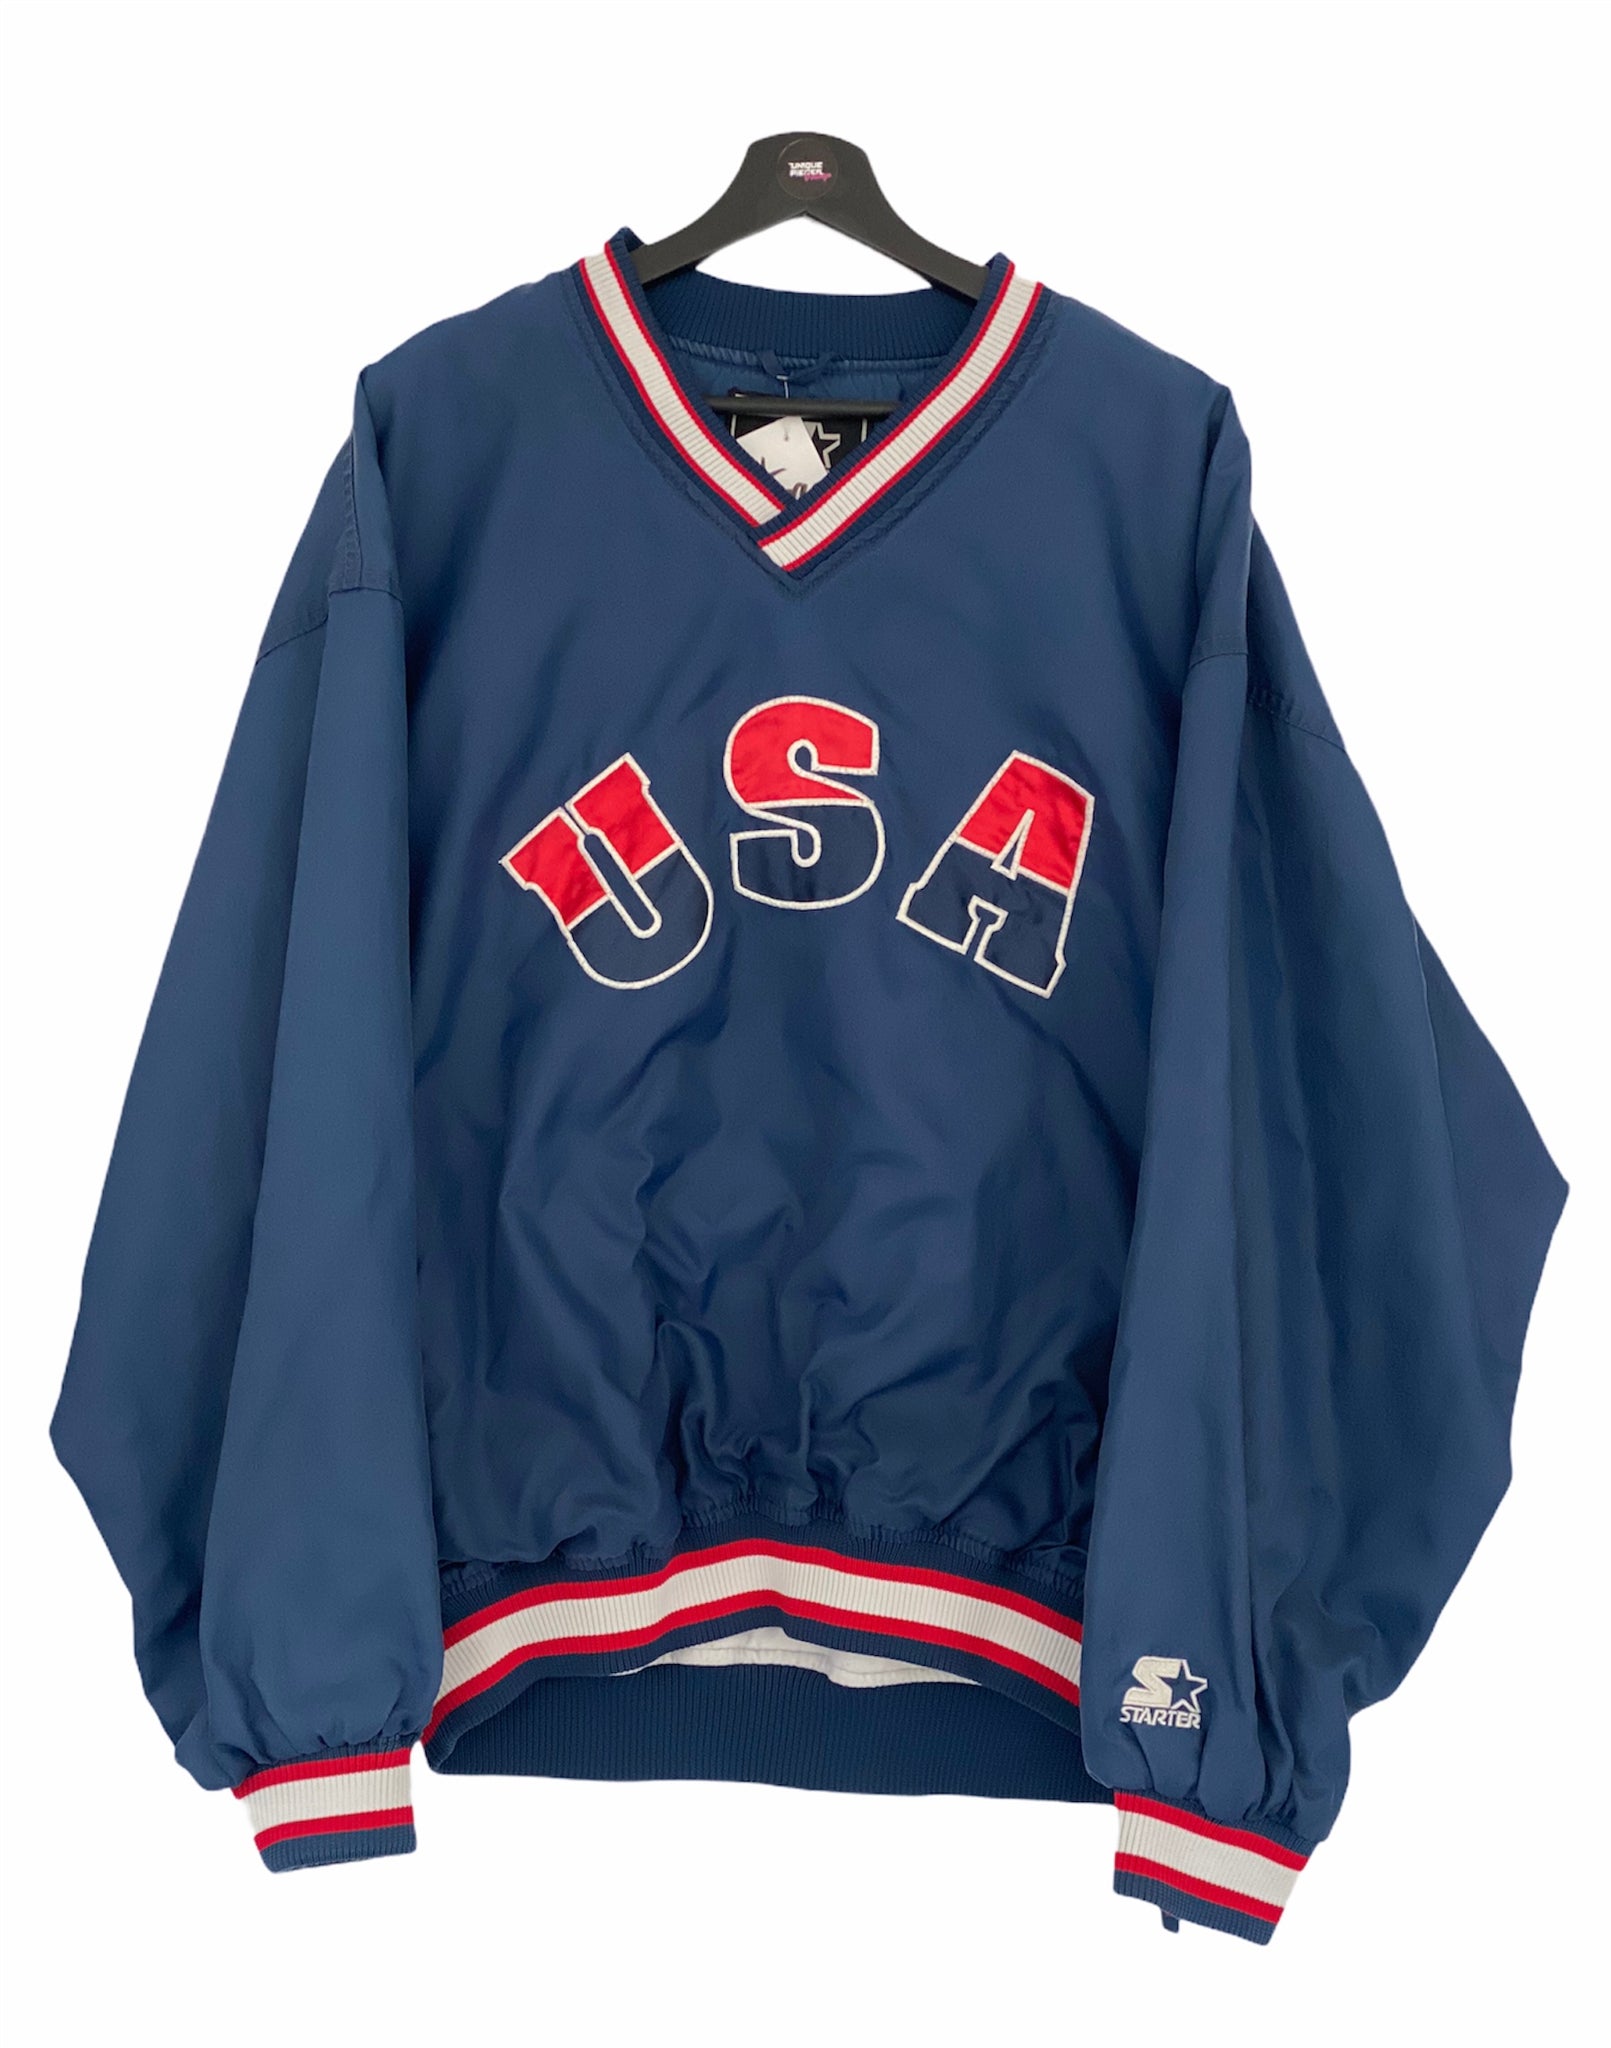 Starter Team USA Olympic Dream Team sweater warm up blue/ red white  XLarge